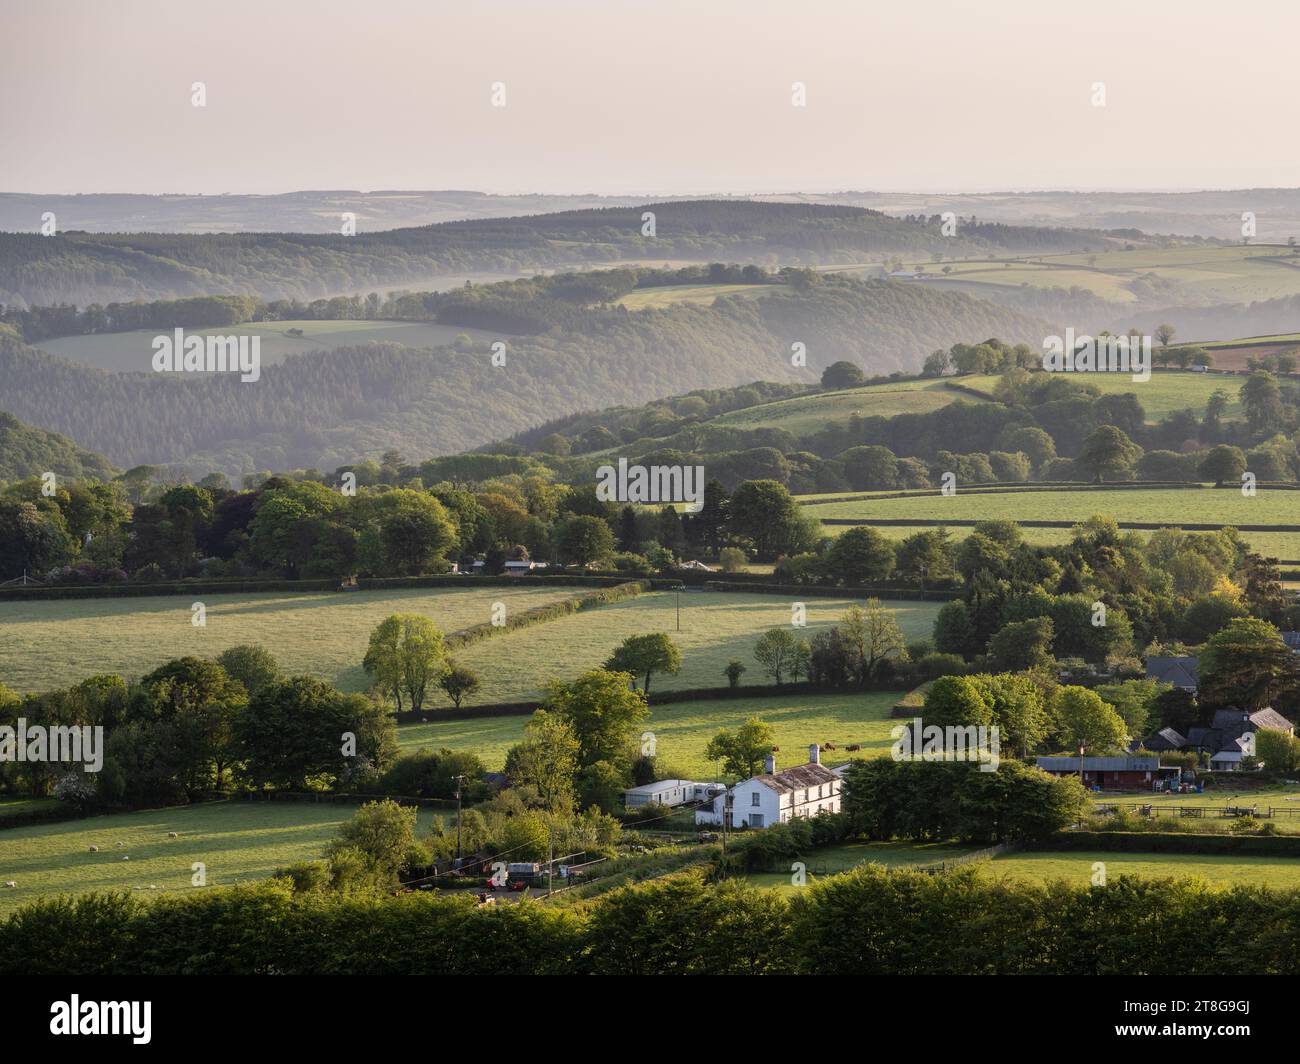 Morning mist rises from Lydford Forest and Lew Wood in the Lyd and Lew valleys of West Devon, as seen from Brent Tor hill. Stock Photo